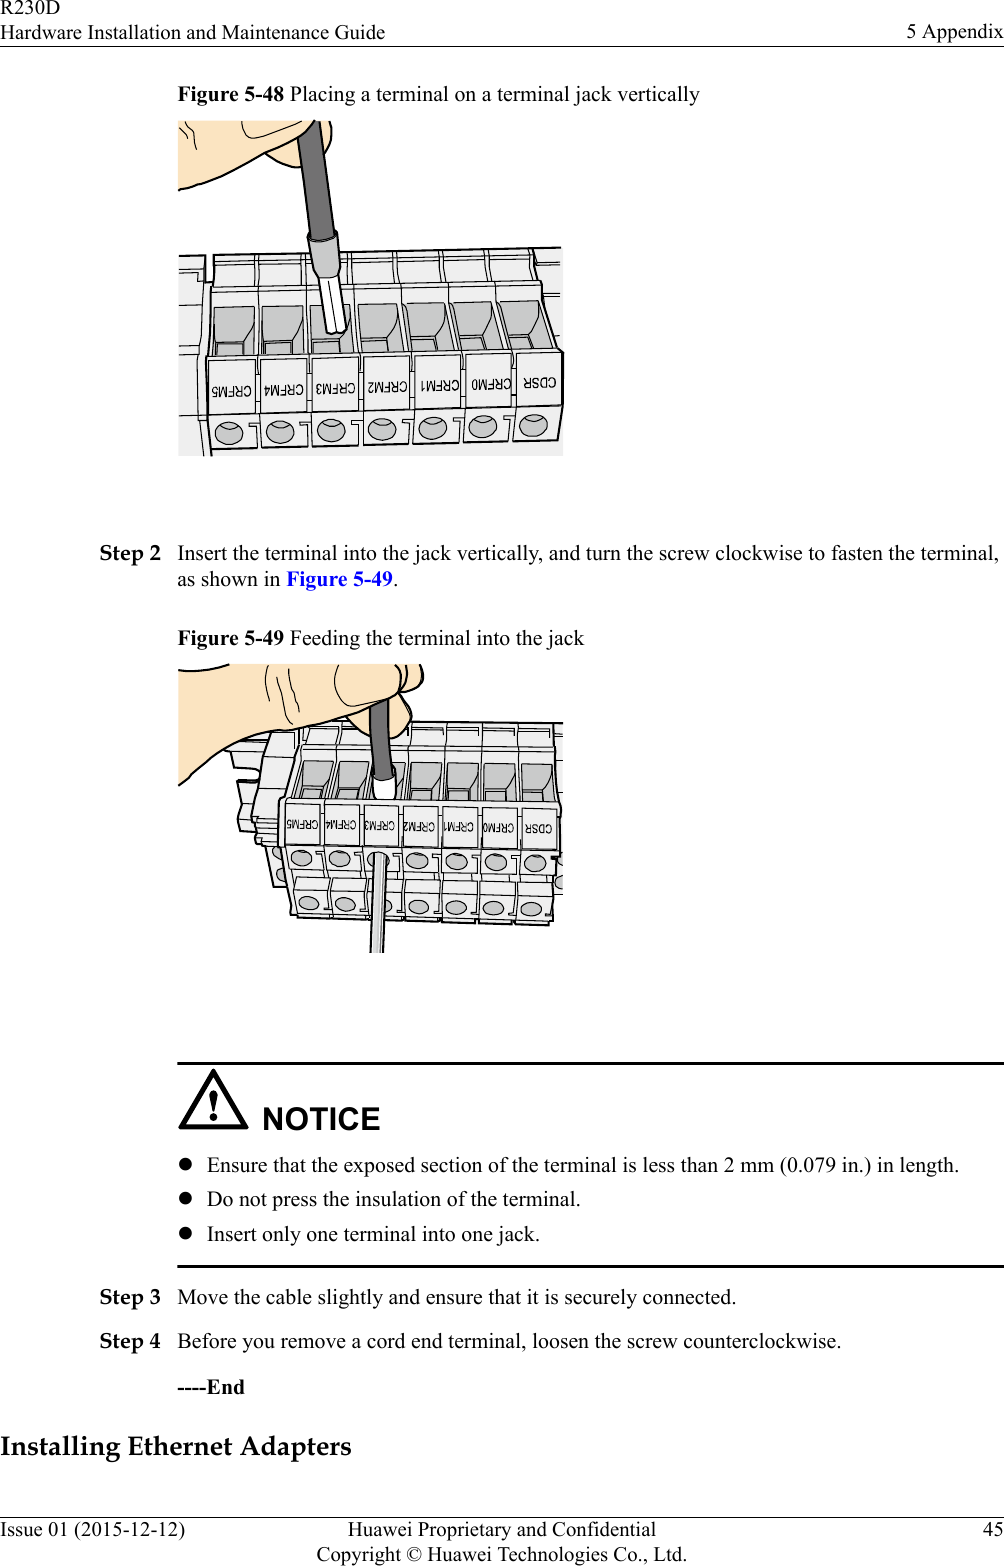 Figure 5-48 Placing a terminal on a terminal jack vertically Step 2 Insert the terminal into the jack vertically, and turn the screw clockwise to fasten the terminal,as shown in Figure 5-49.Figure 5-49 Feeding the terminal into the jack NOTICElEnsure that the exposed section of the terminal is less than 2 mm (0.079 in.) in length.lDo not press the insulation of the terminal.lInsert only one terminal into one jack.Step 3 Move the cable slightly and ensure that it is securely connected.Step 4 Before you remove a cord end terminal, loosen the screw counterclockwise.----EndInstalling Ethernet AdaptersR230DHardware Installation and Maintenance Guide 5 AppendixIssue 01 (2015-12-12) Huawei Proprietary and ConfidentialCopyright © Huawei Technologies Co., Ltd.45